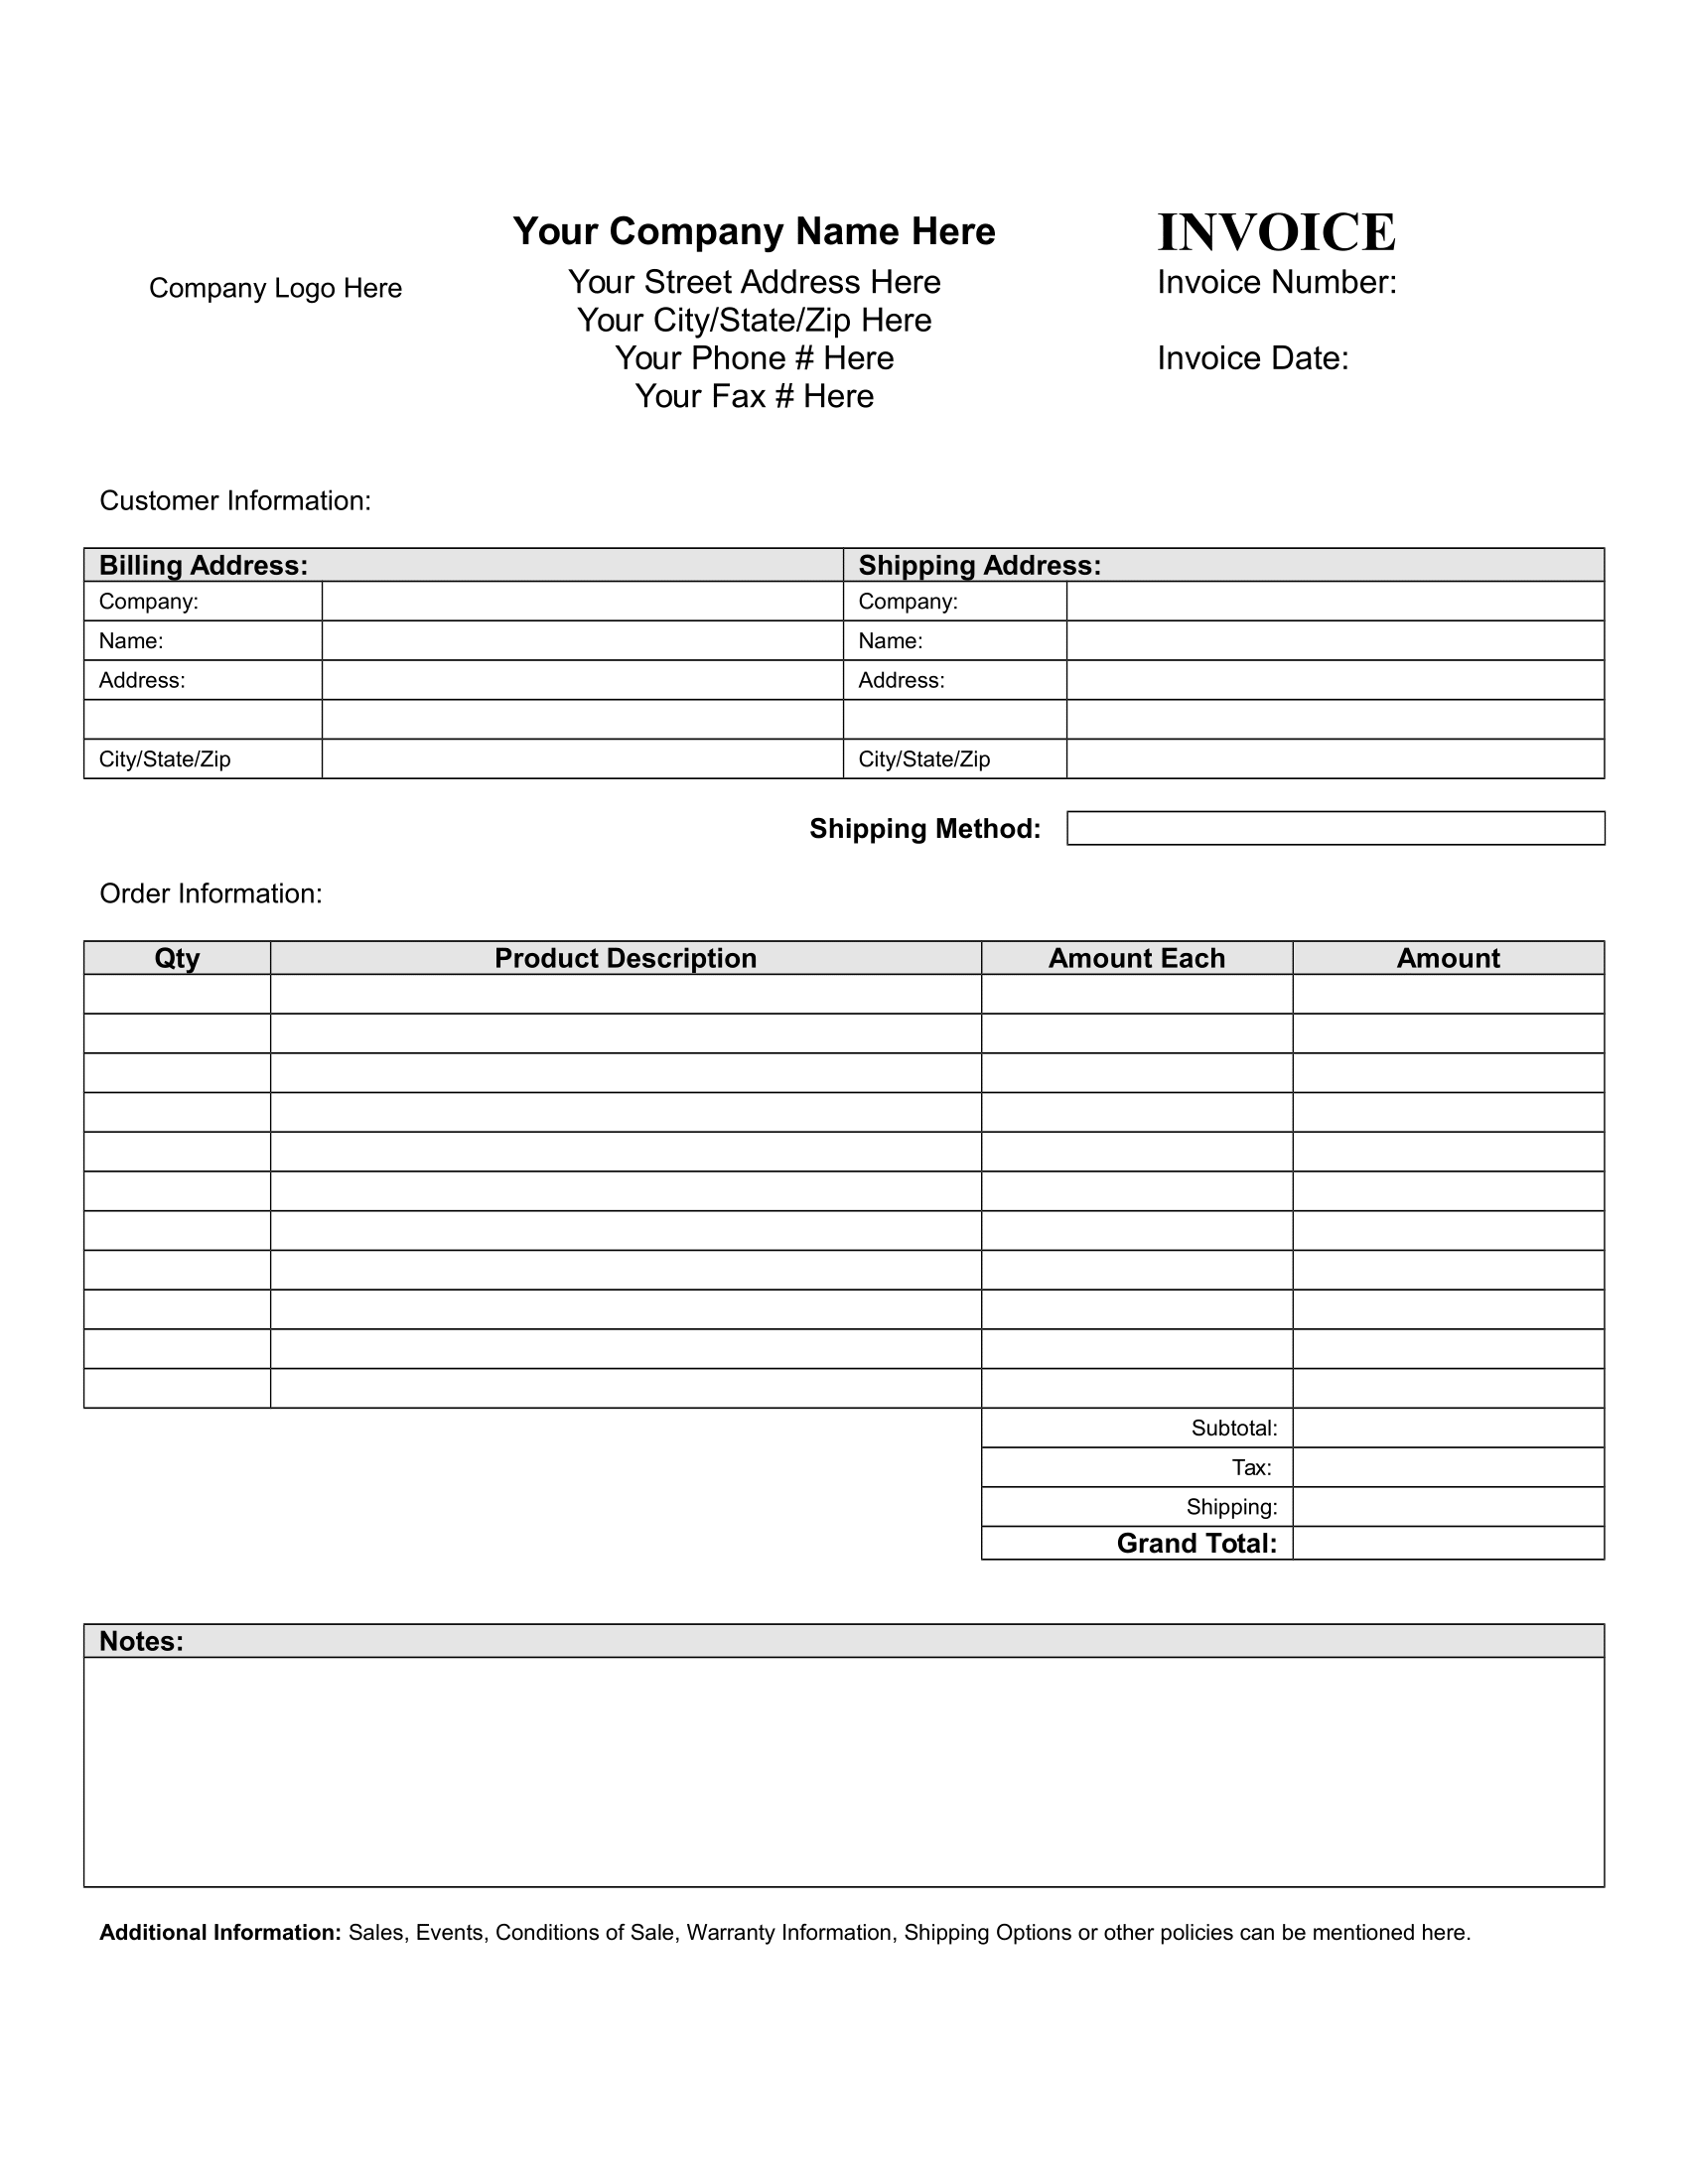 Blank Invoice Form – Download FREE Template